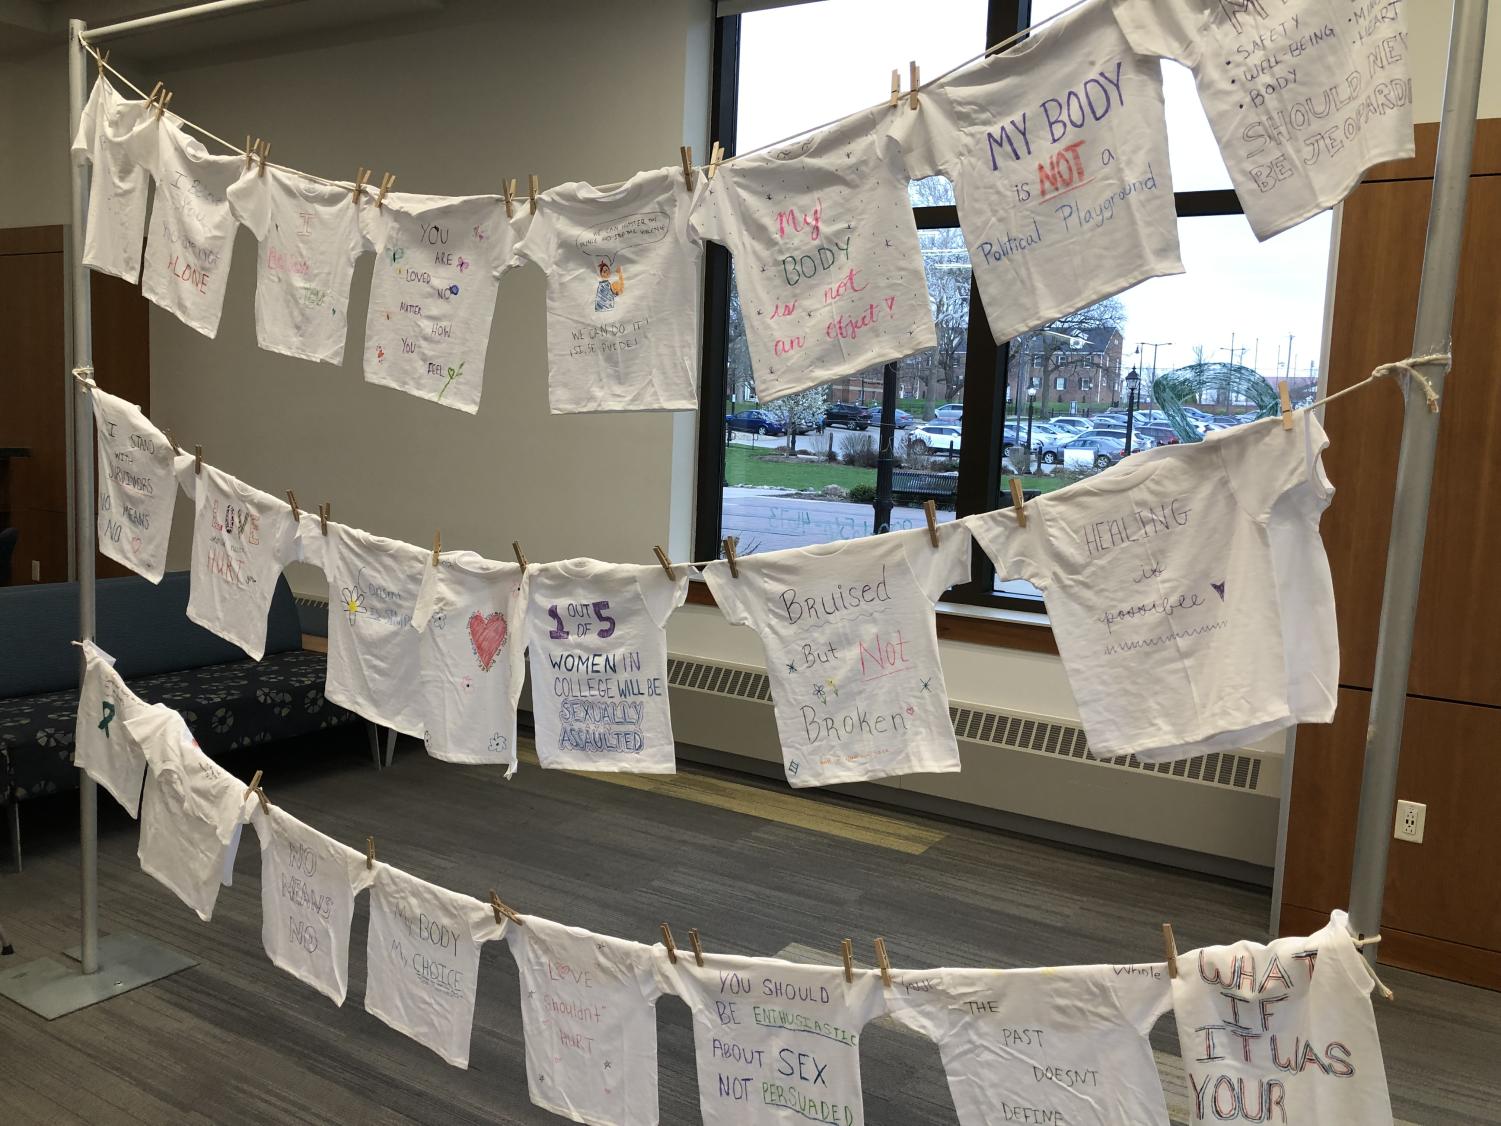 The Clothesline Project display at Millikin.